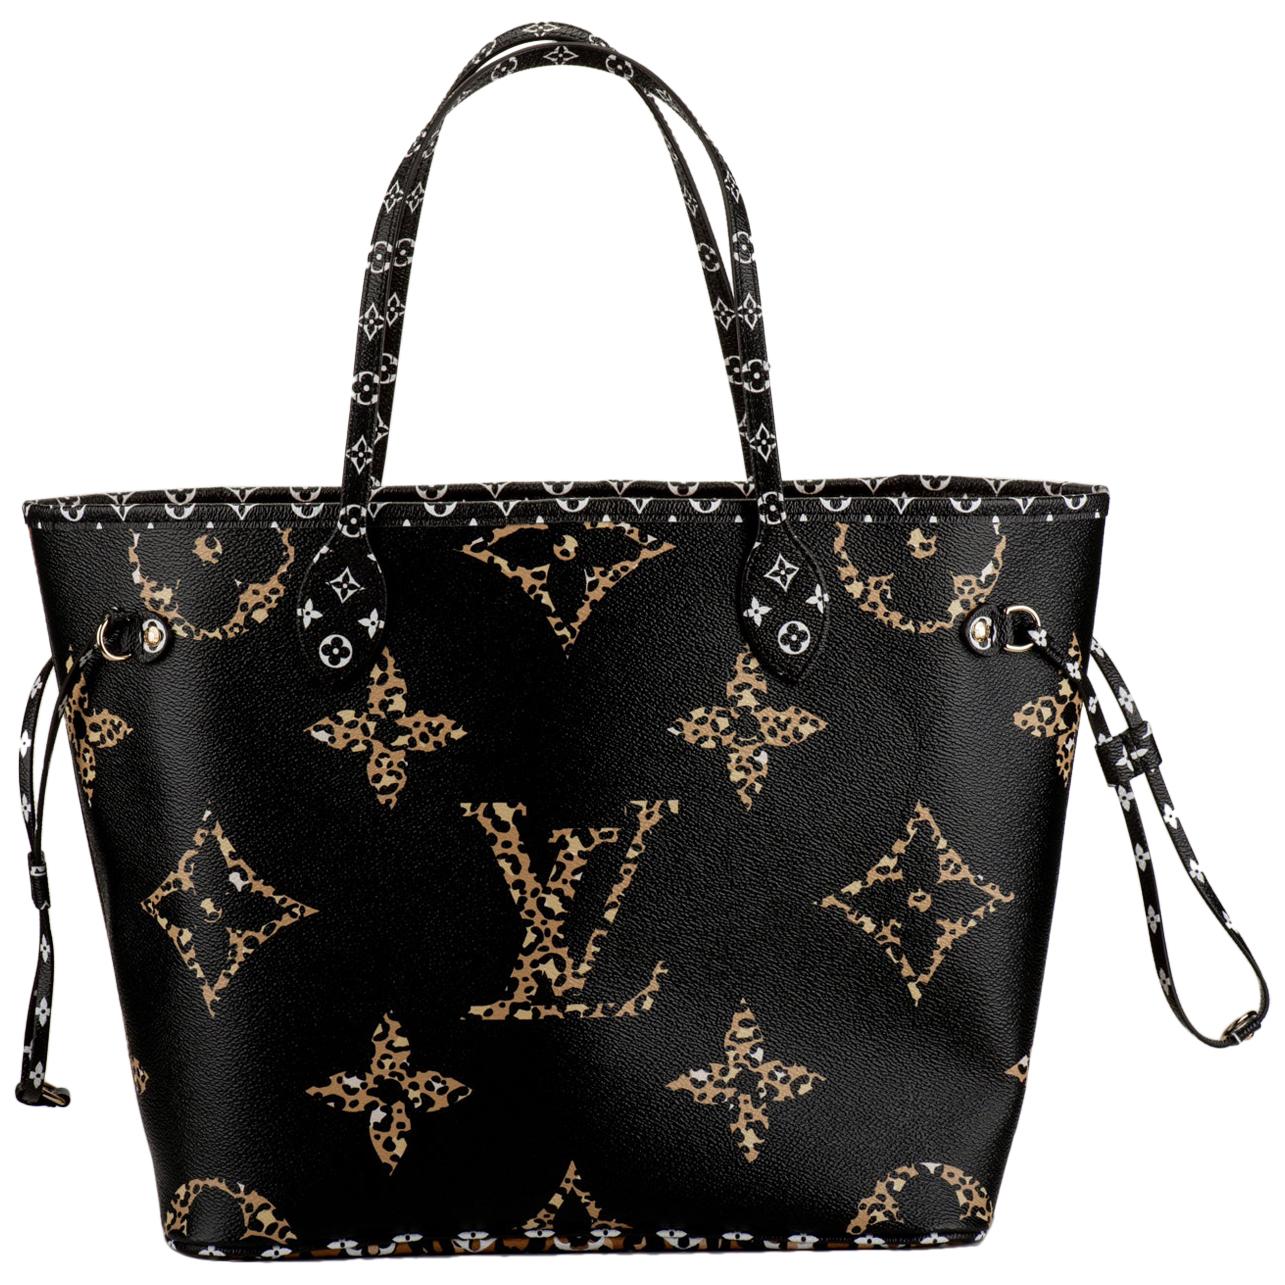 New in Box Louis Vuitton Limited Edition Animalier Neverfull MM Tote Bag